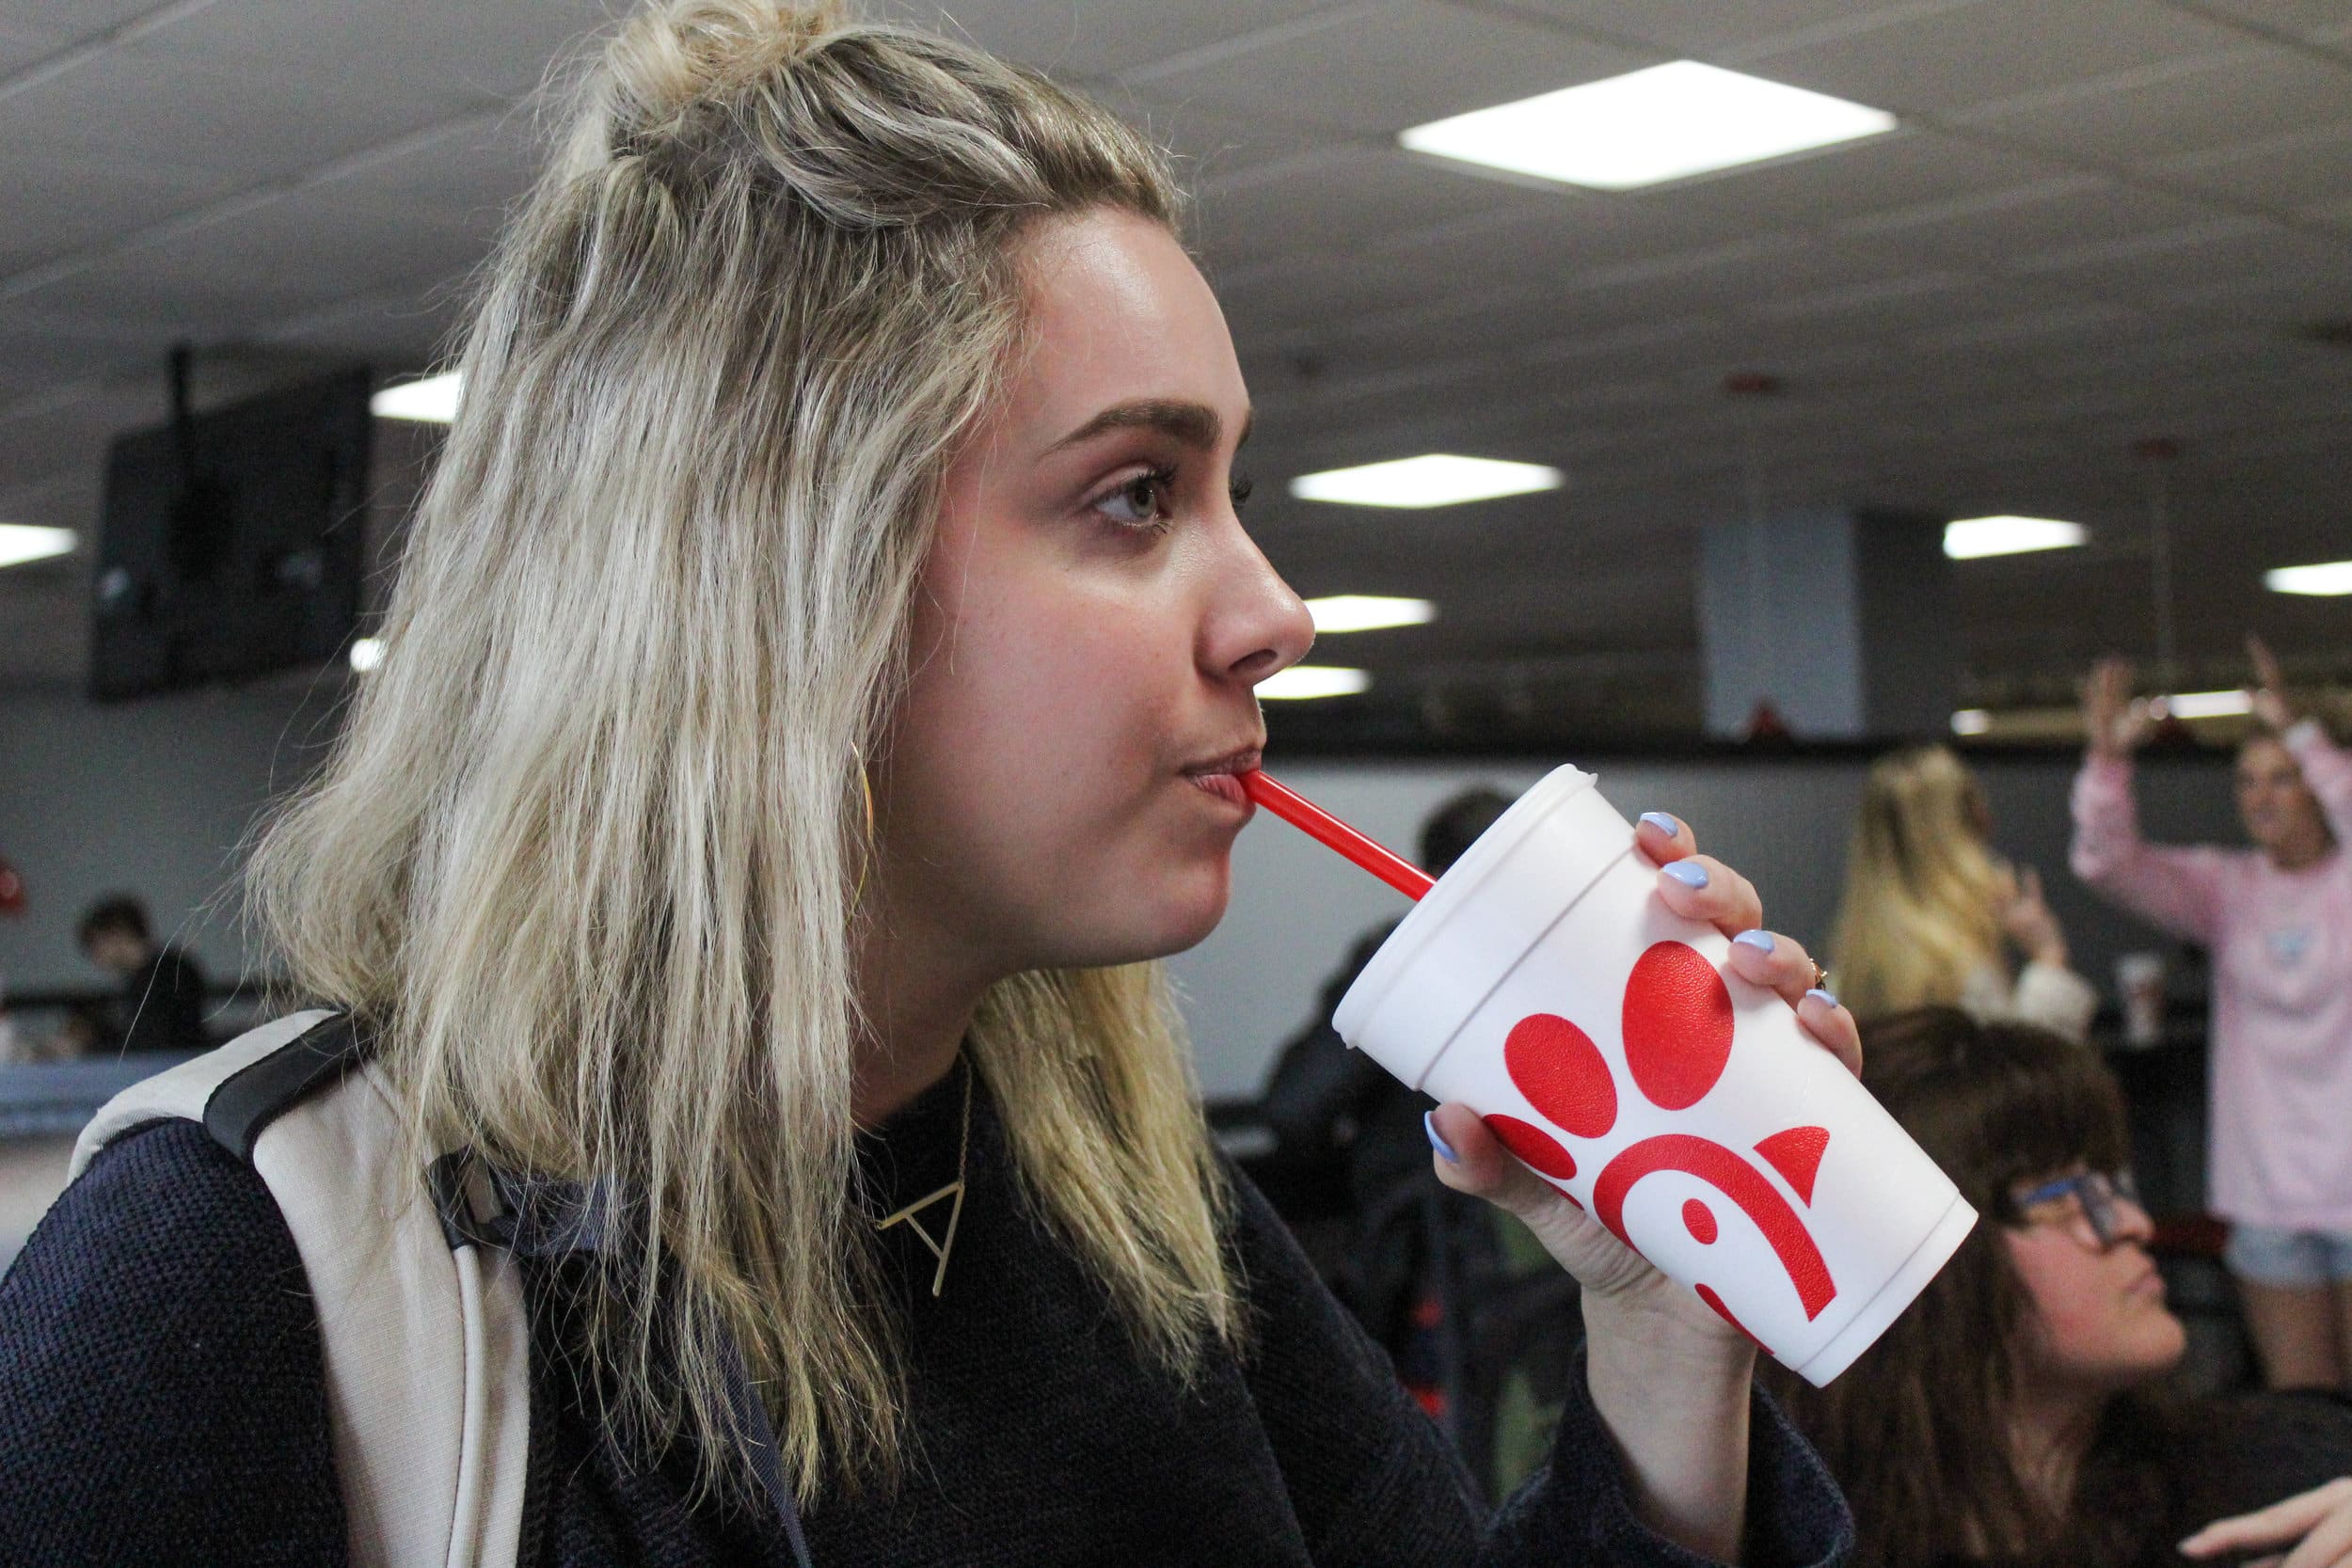 Freshman, Abby Swindal, waits in line for her lunch at Chick-fil-A.